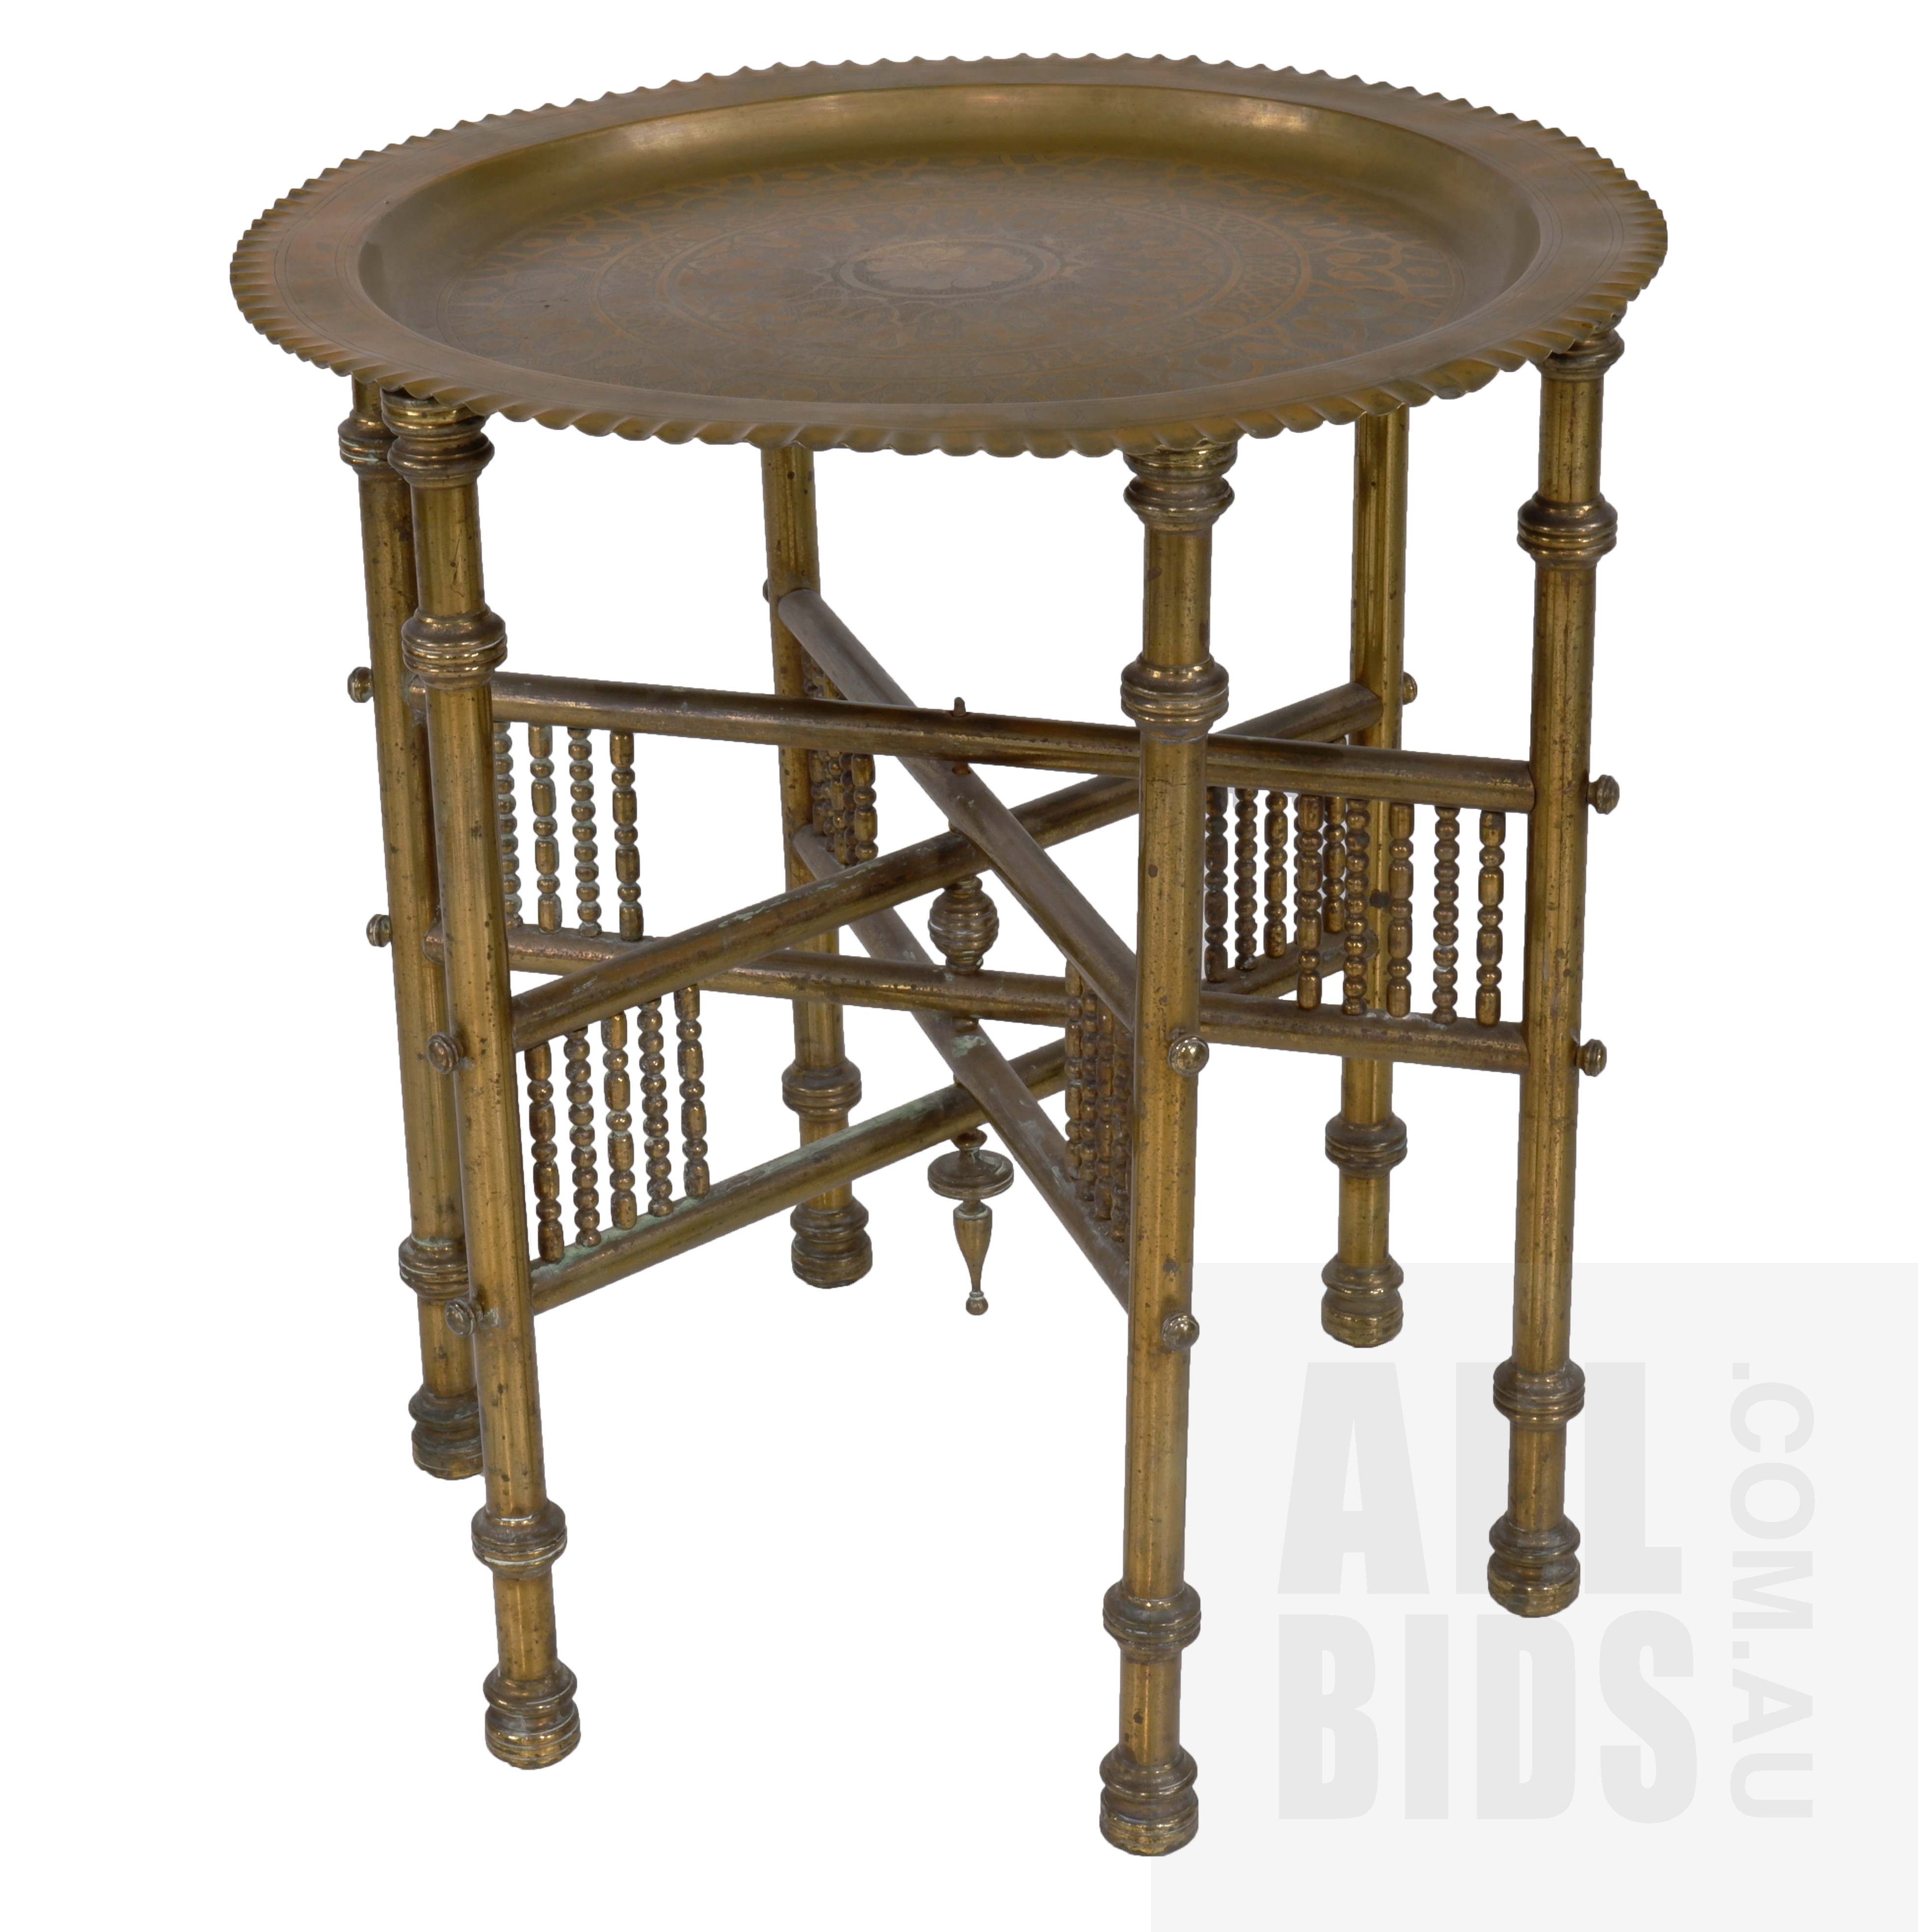 'Fine Antique Heavy Brass Exotic Folding Table in the Moresque Style Circa 1900'